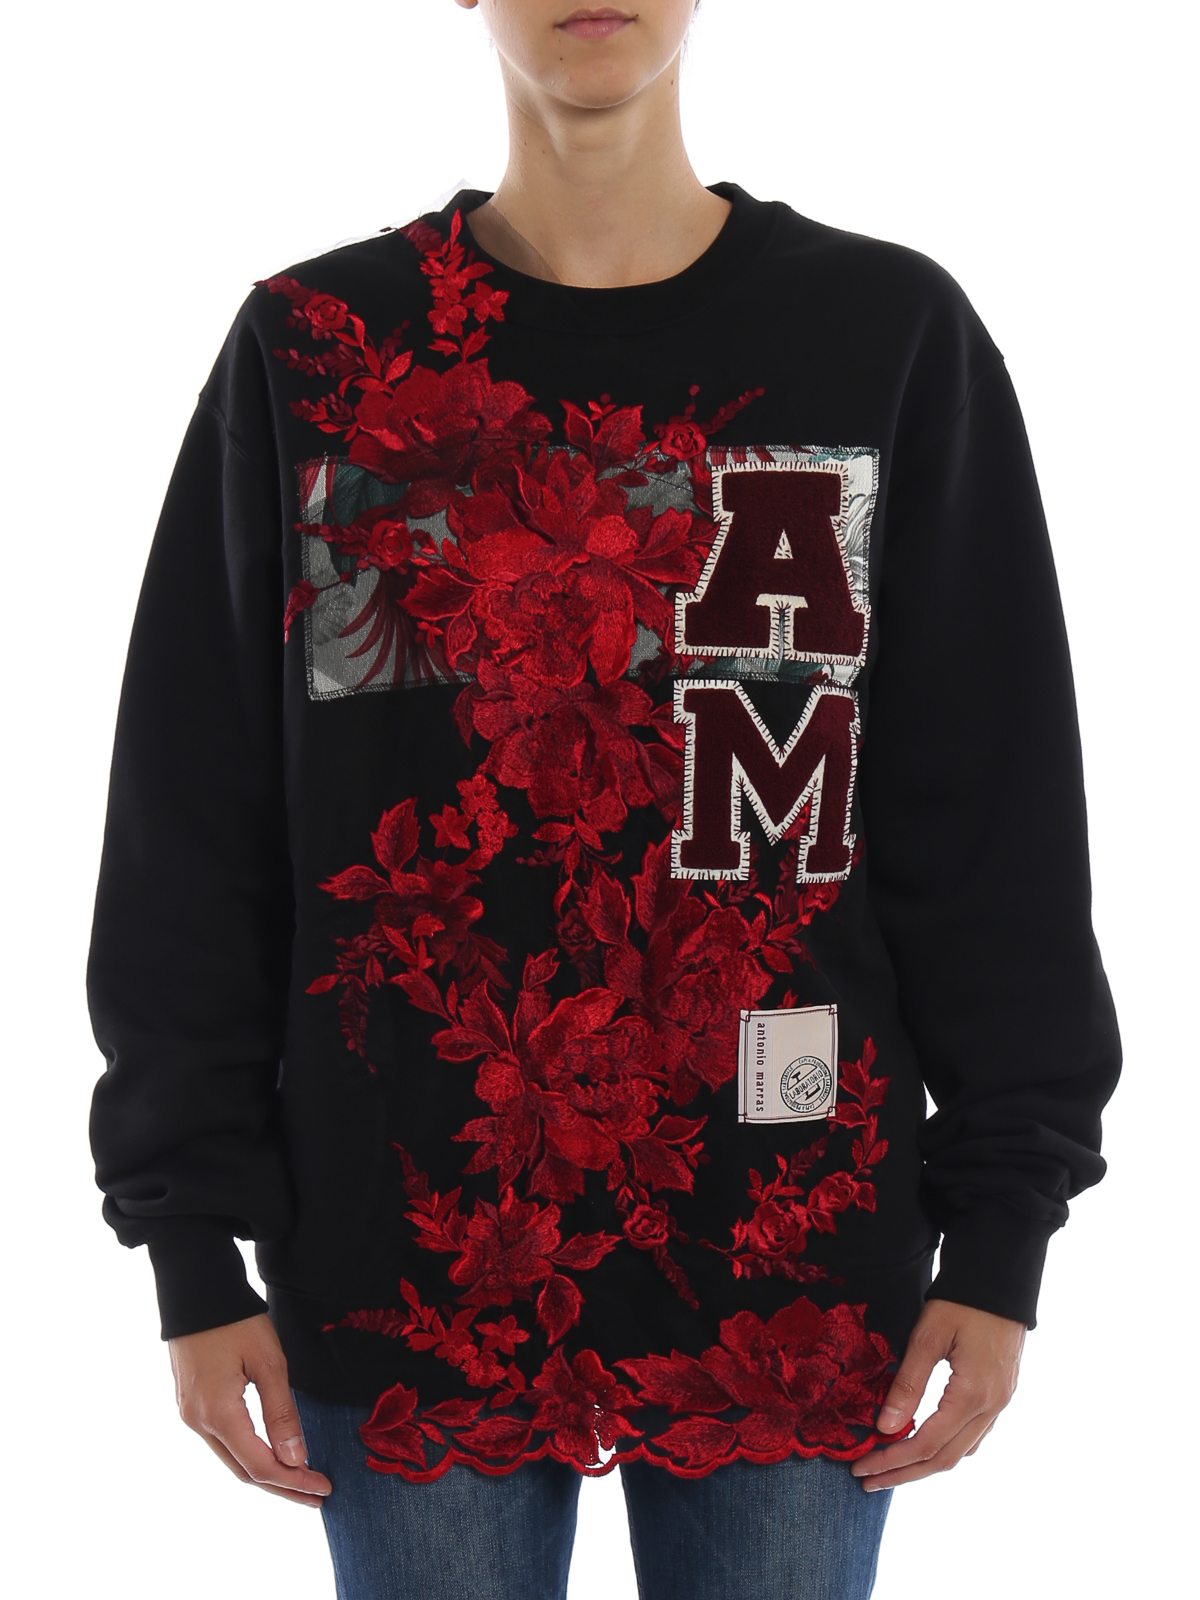 Sweatshirts & Sweaters Marras - Maxi floral embroidery cotton over sweatshirt -